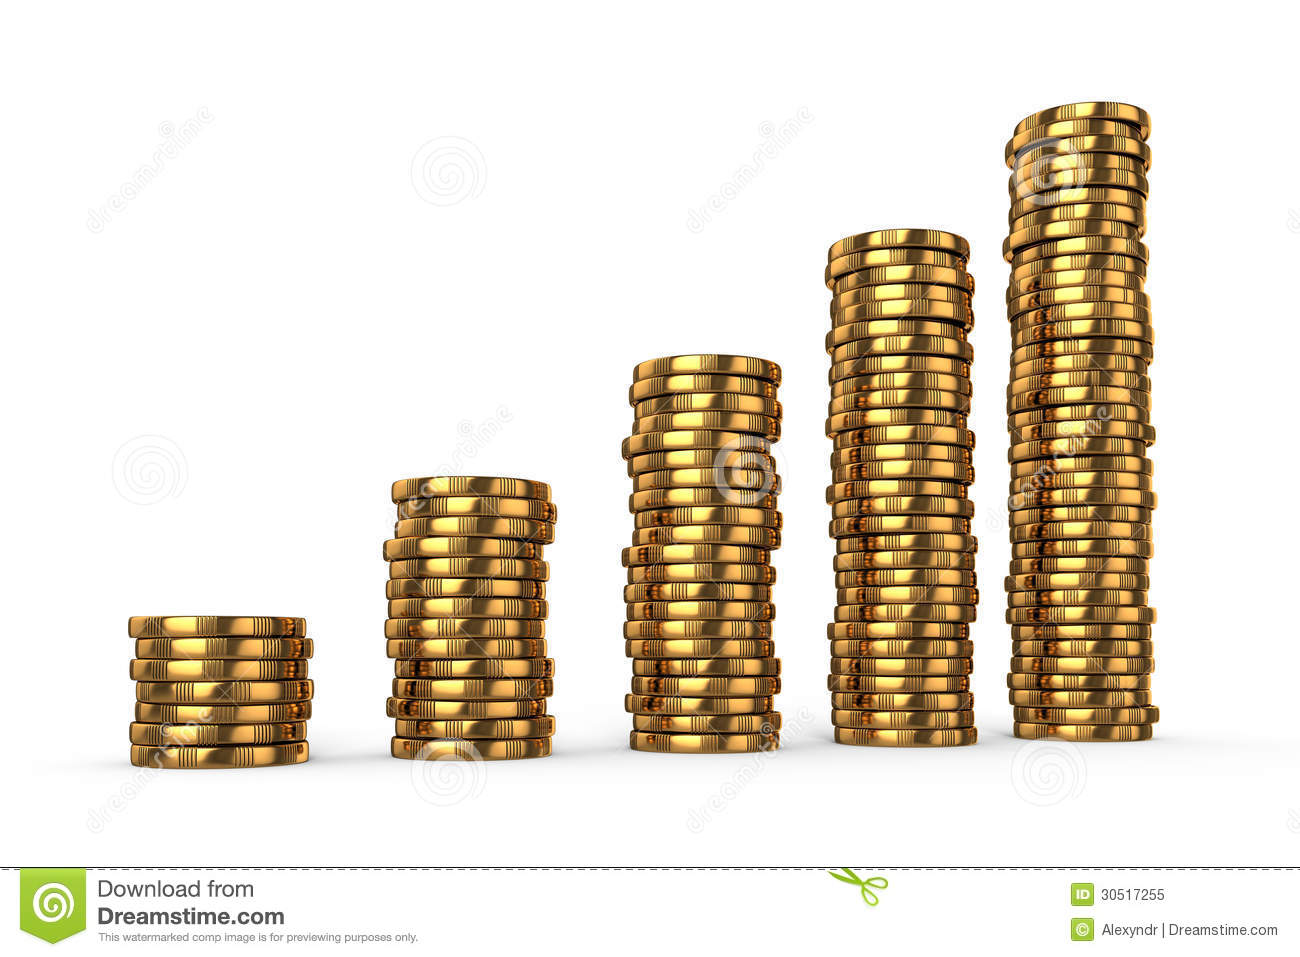 Gold Coins Stacks Royalty Free Stock Photo   Image  30517255